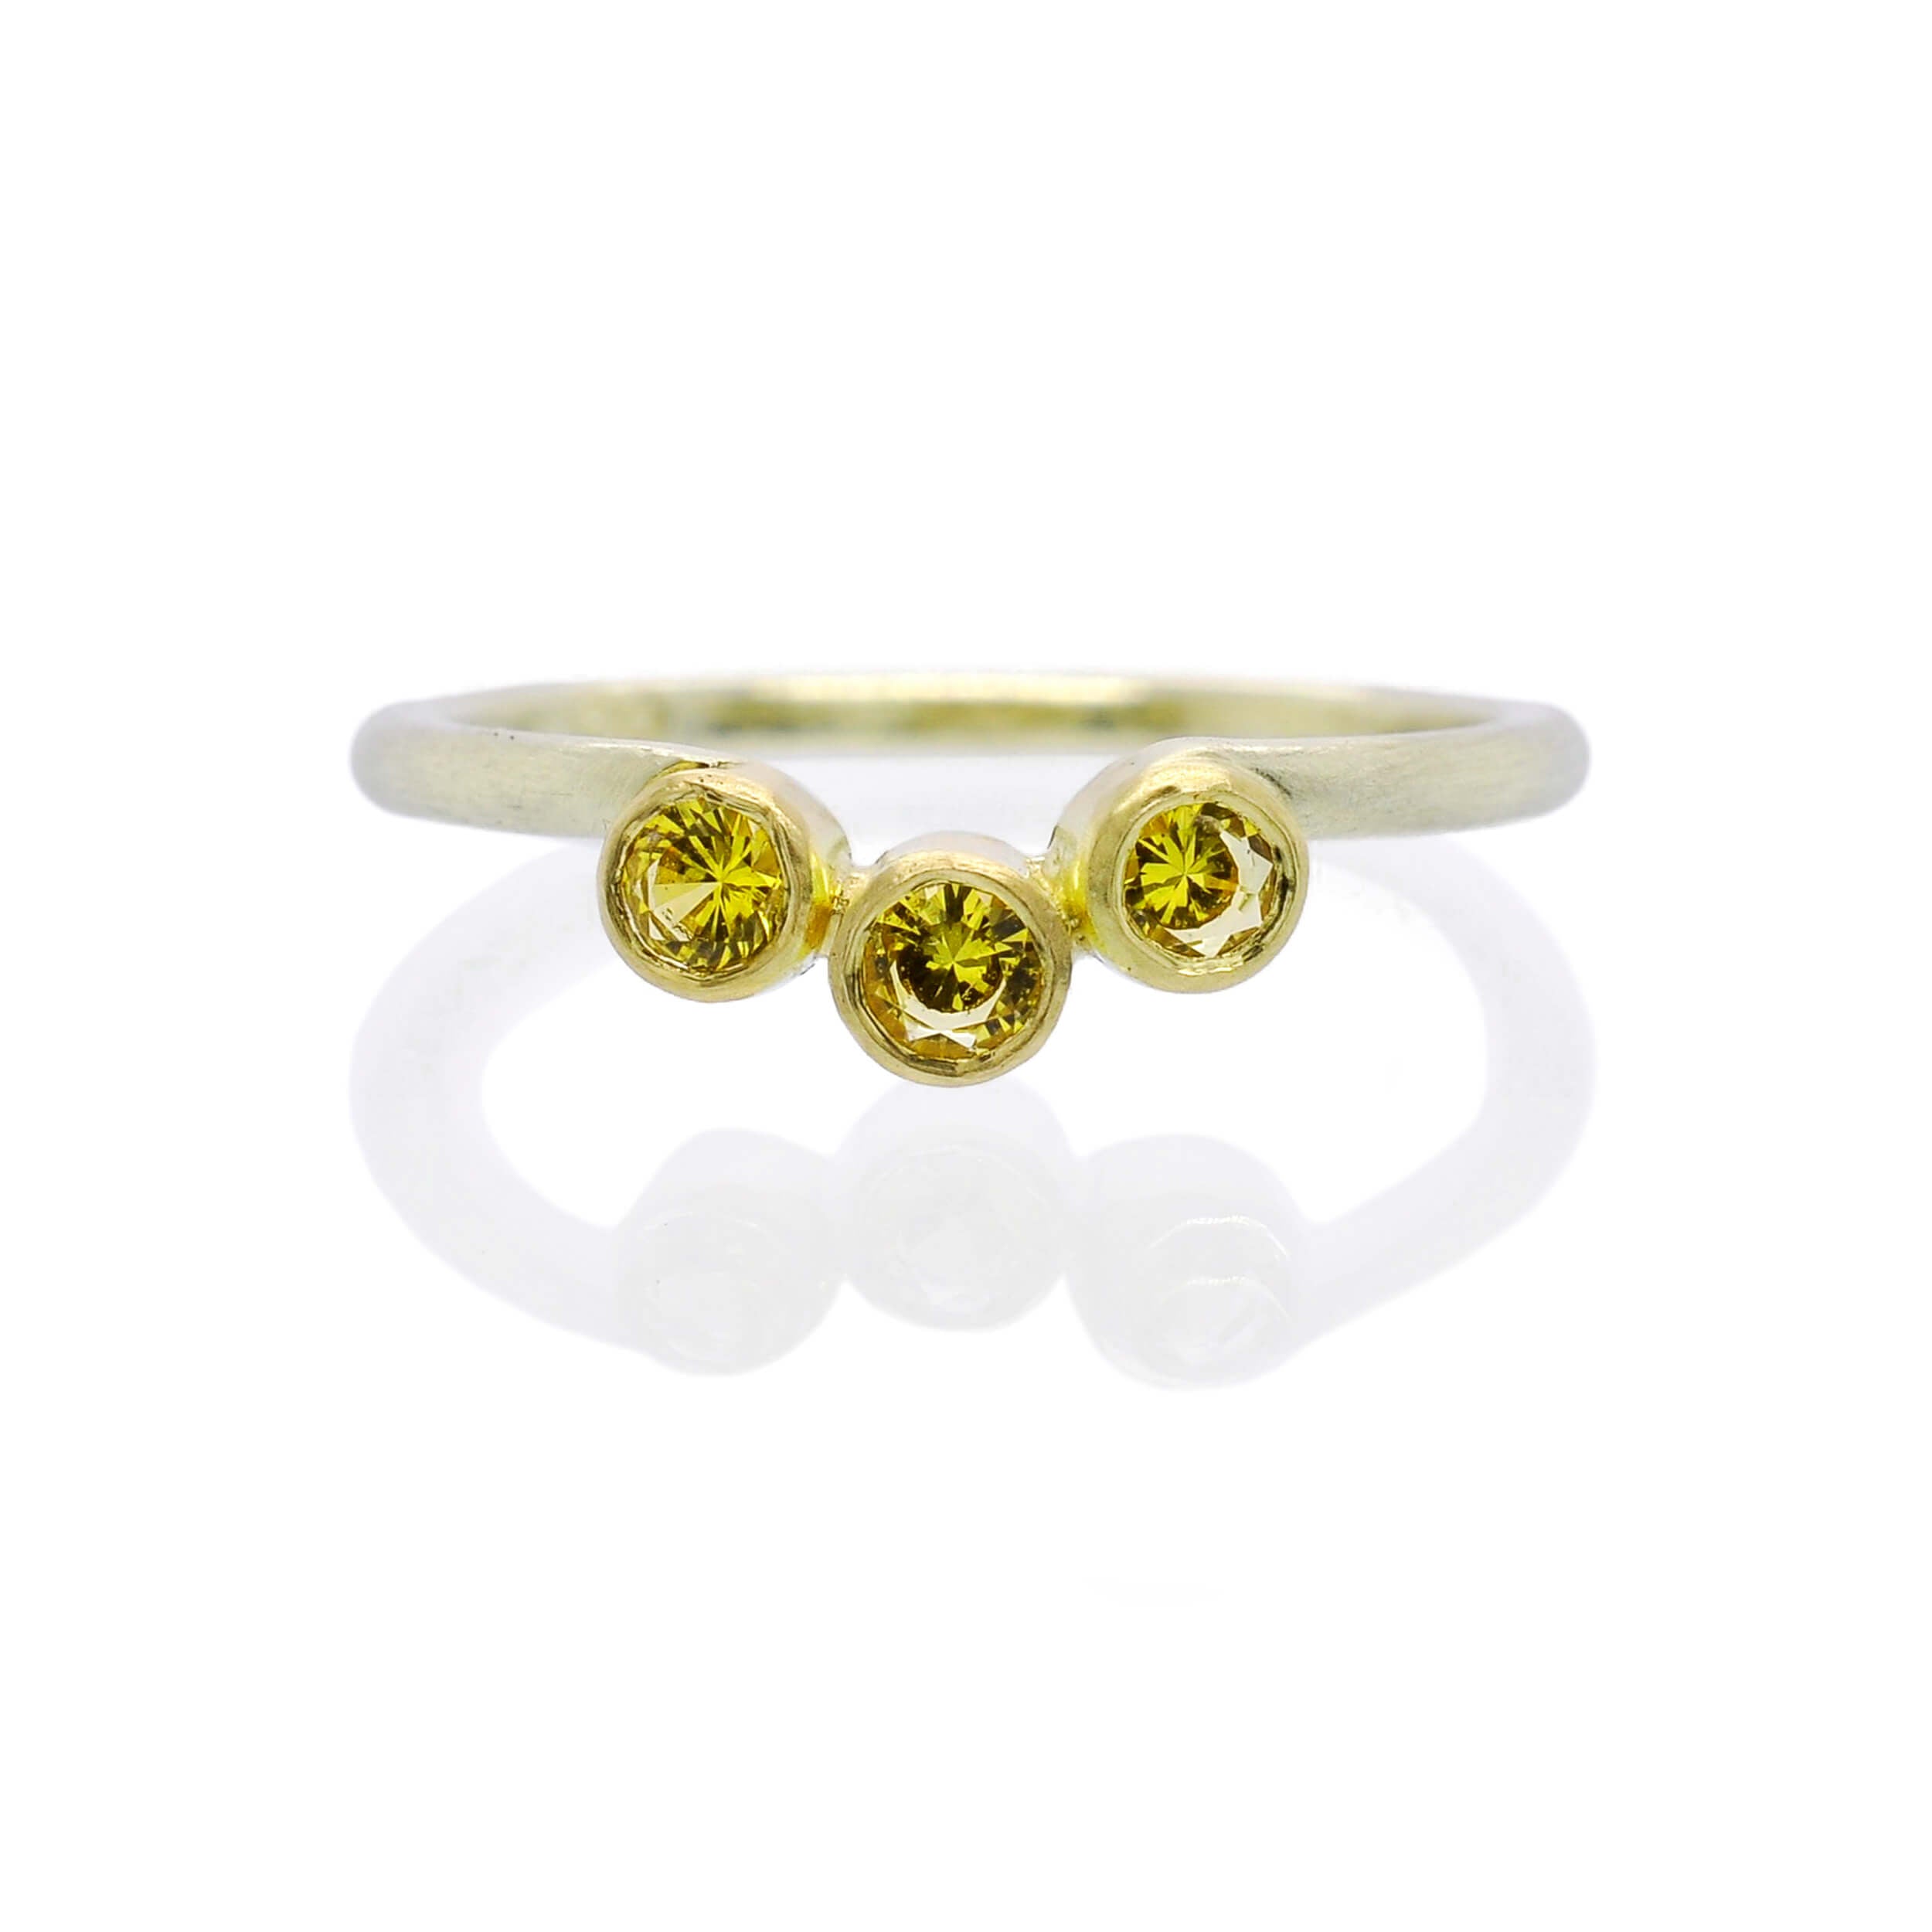 Certified Yellow Sapphire Ring, Natural Pukhraj Ring